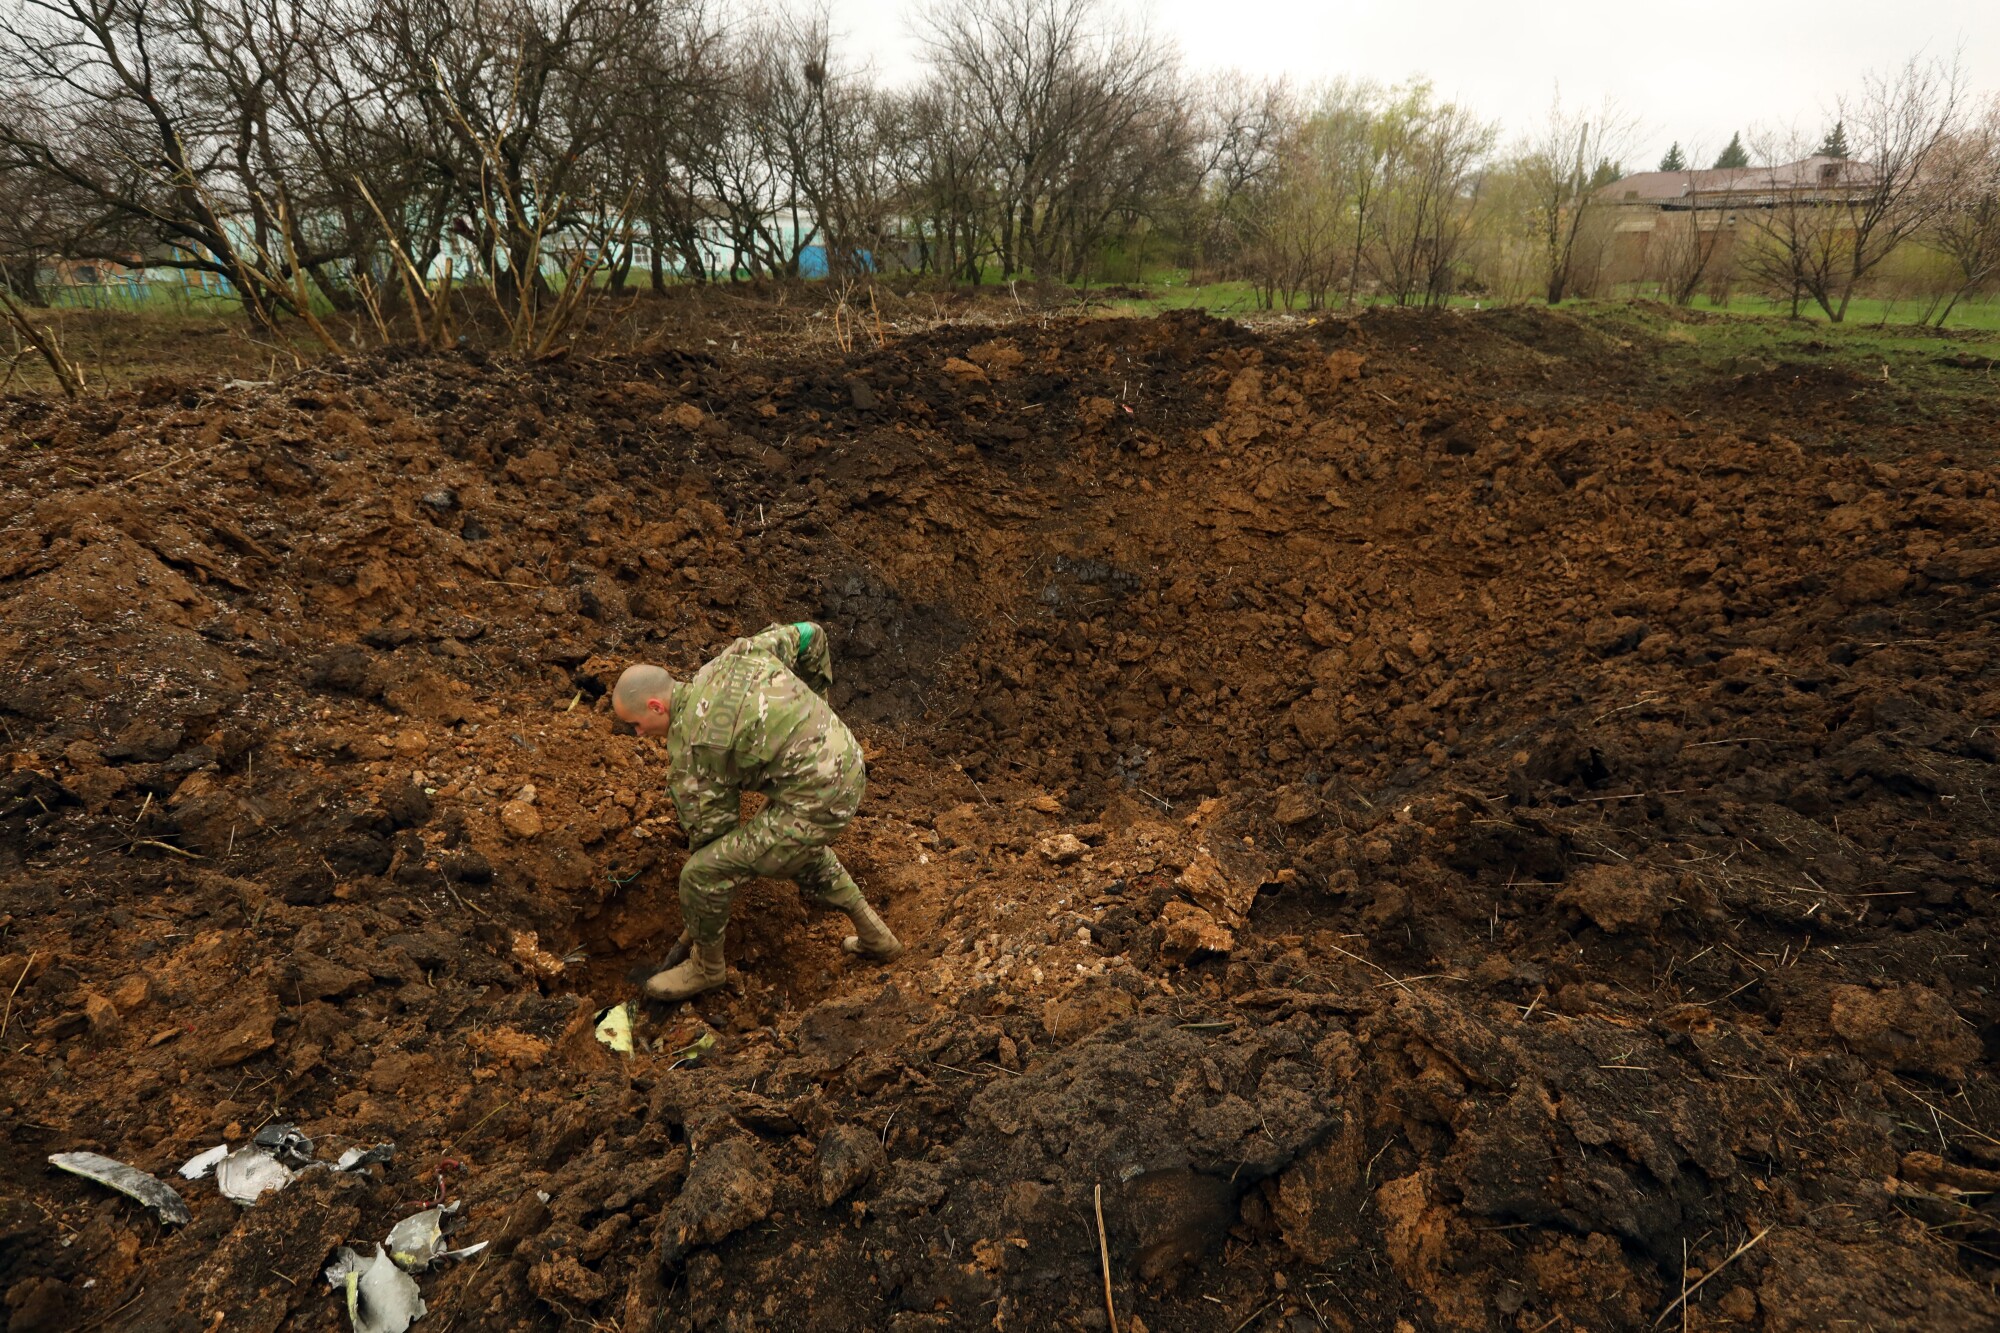 A soldier digs in a giant hole.